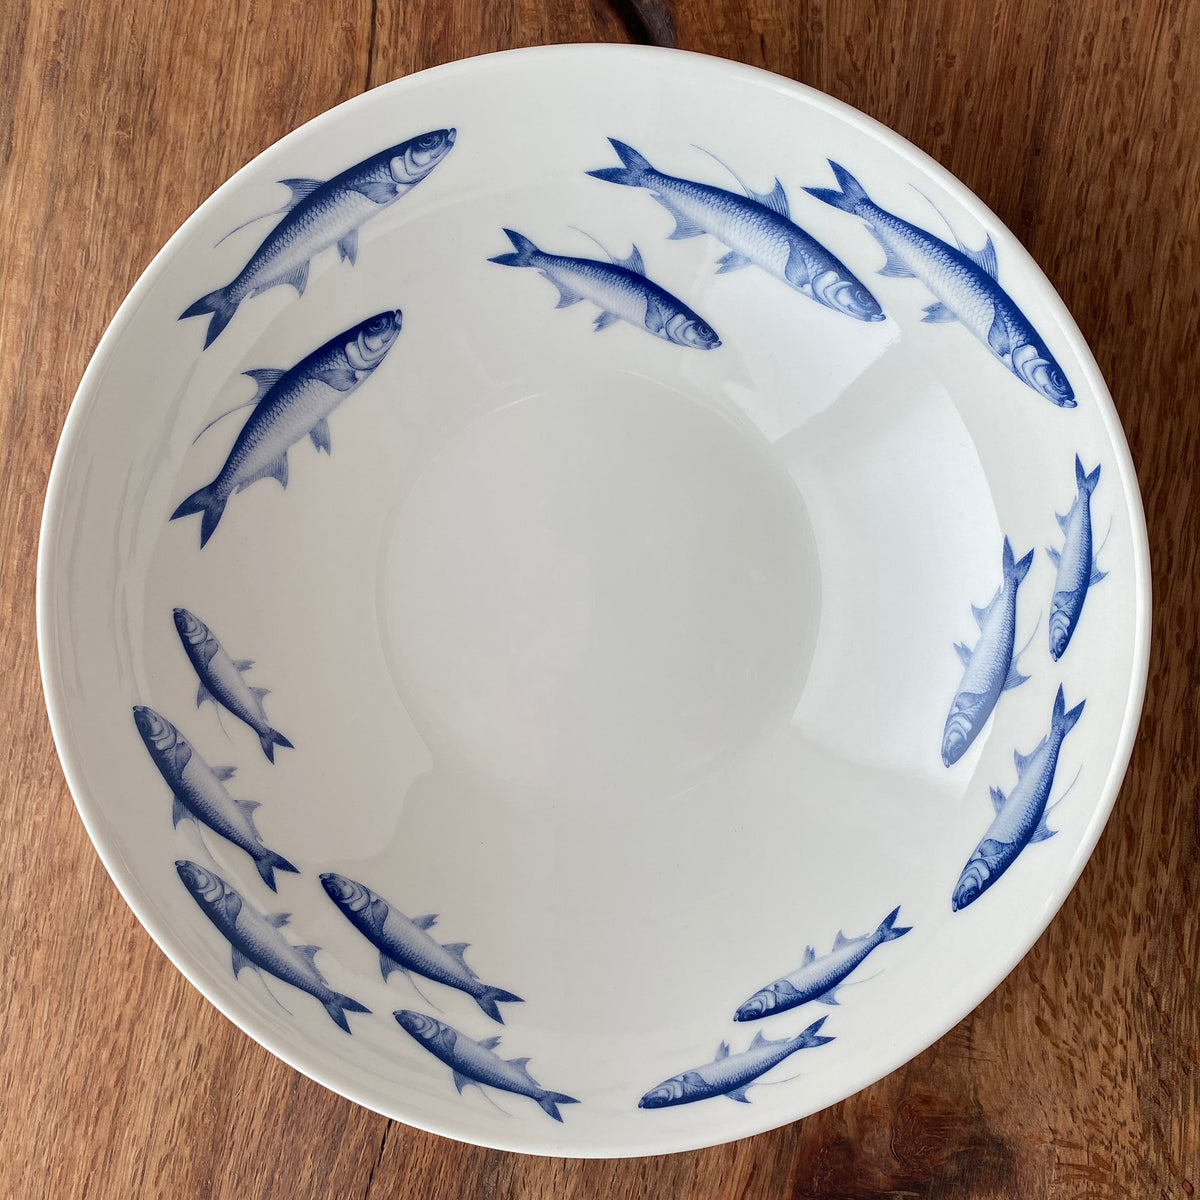 A School of Fish Wide Serving Bowl with fish, serving as a beautiful centerpiece, made by Caskata Artisanal Home.